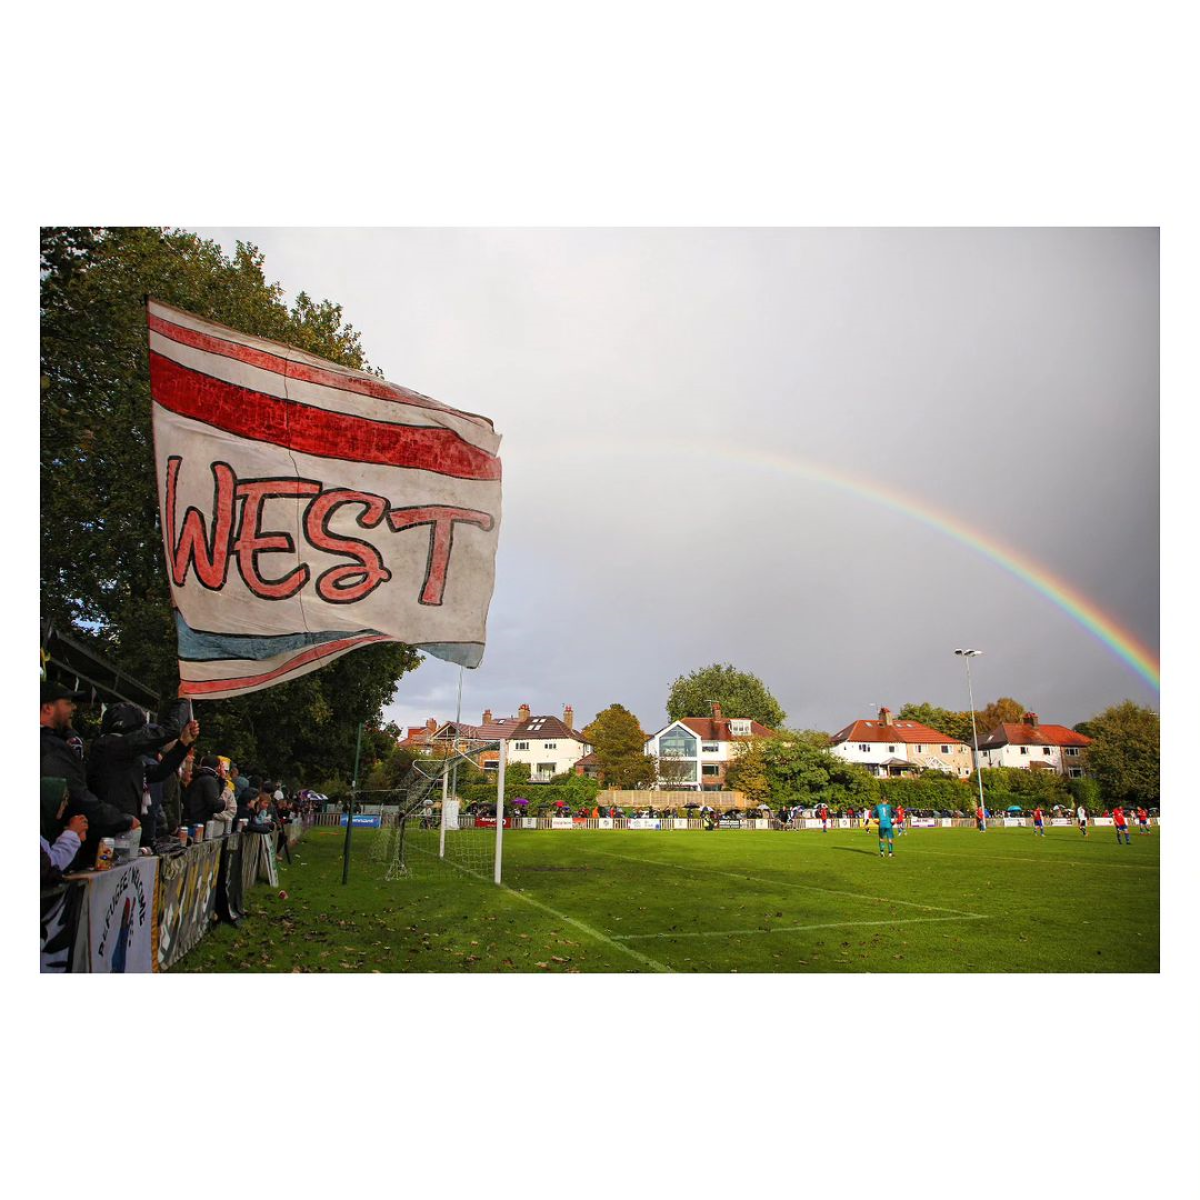 West Didsbury and Chorlton – the future of the beautiful game?